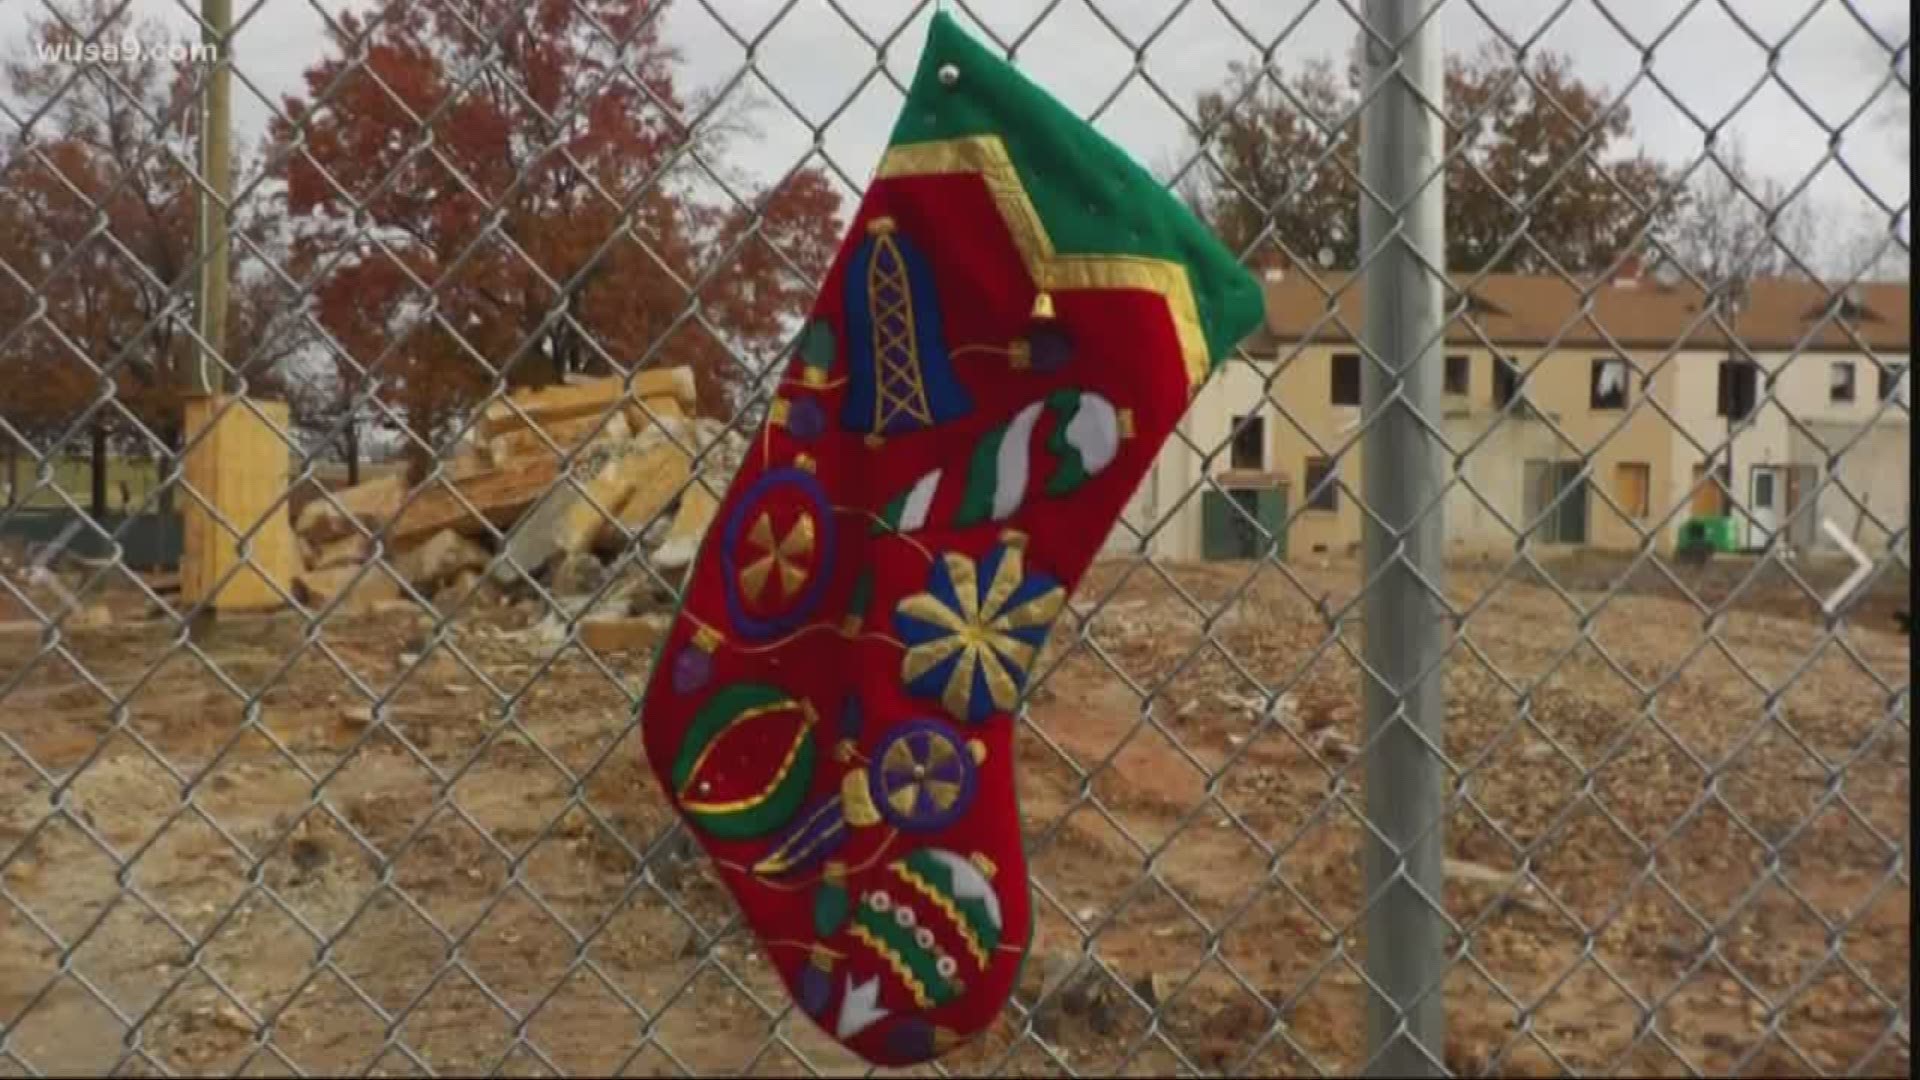 Detrice Belt is moving out of Barry Farm housing development in Southeast, DC after getting weekly notices marked urgent and plus a 90-day notice to vacate by Friday, December 21.